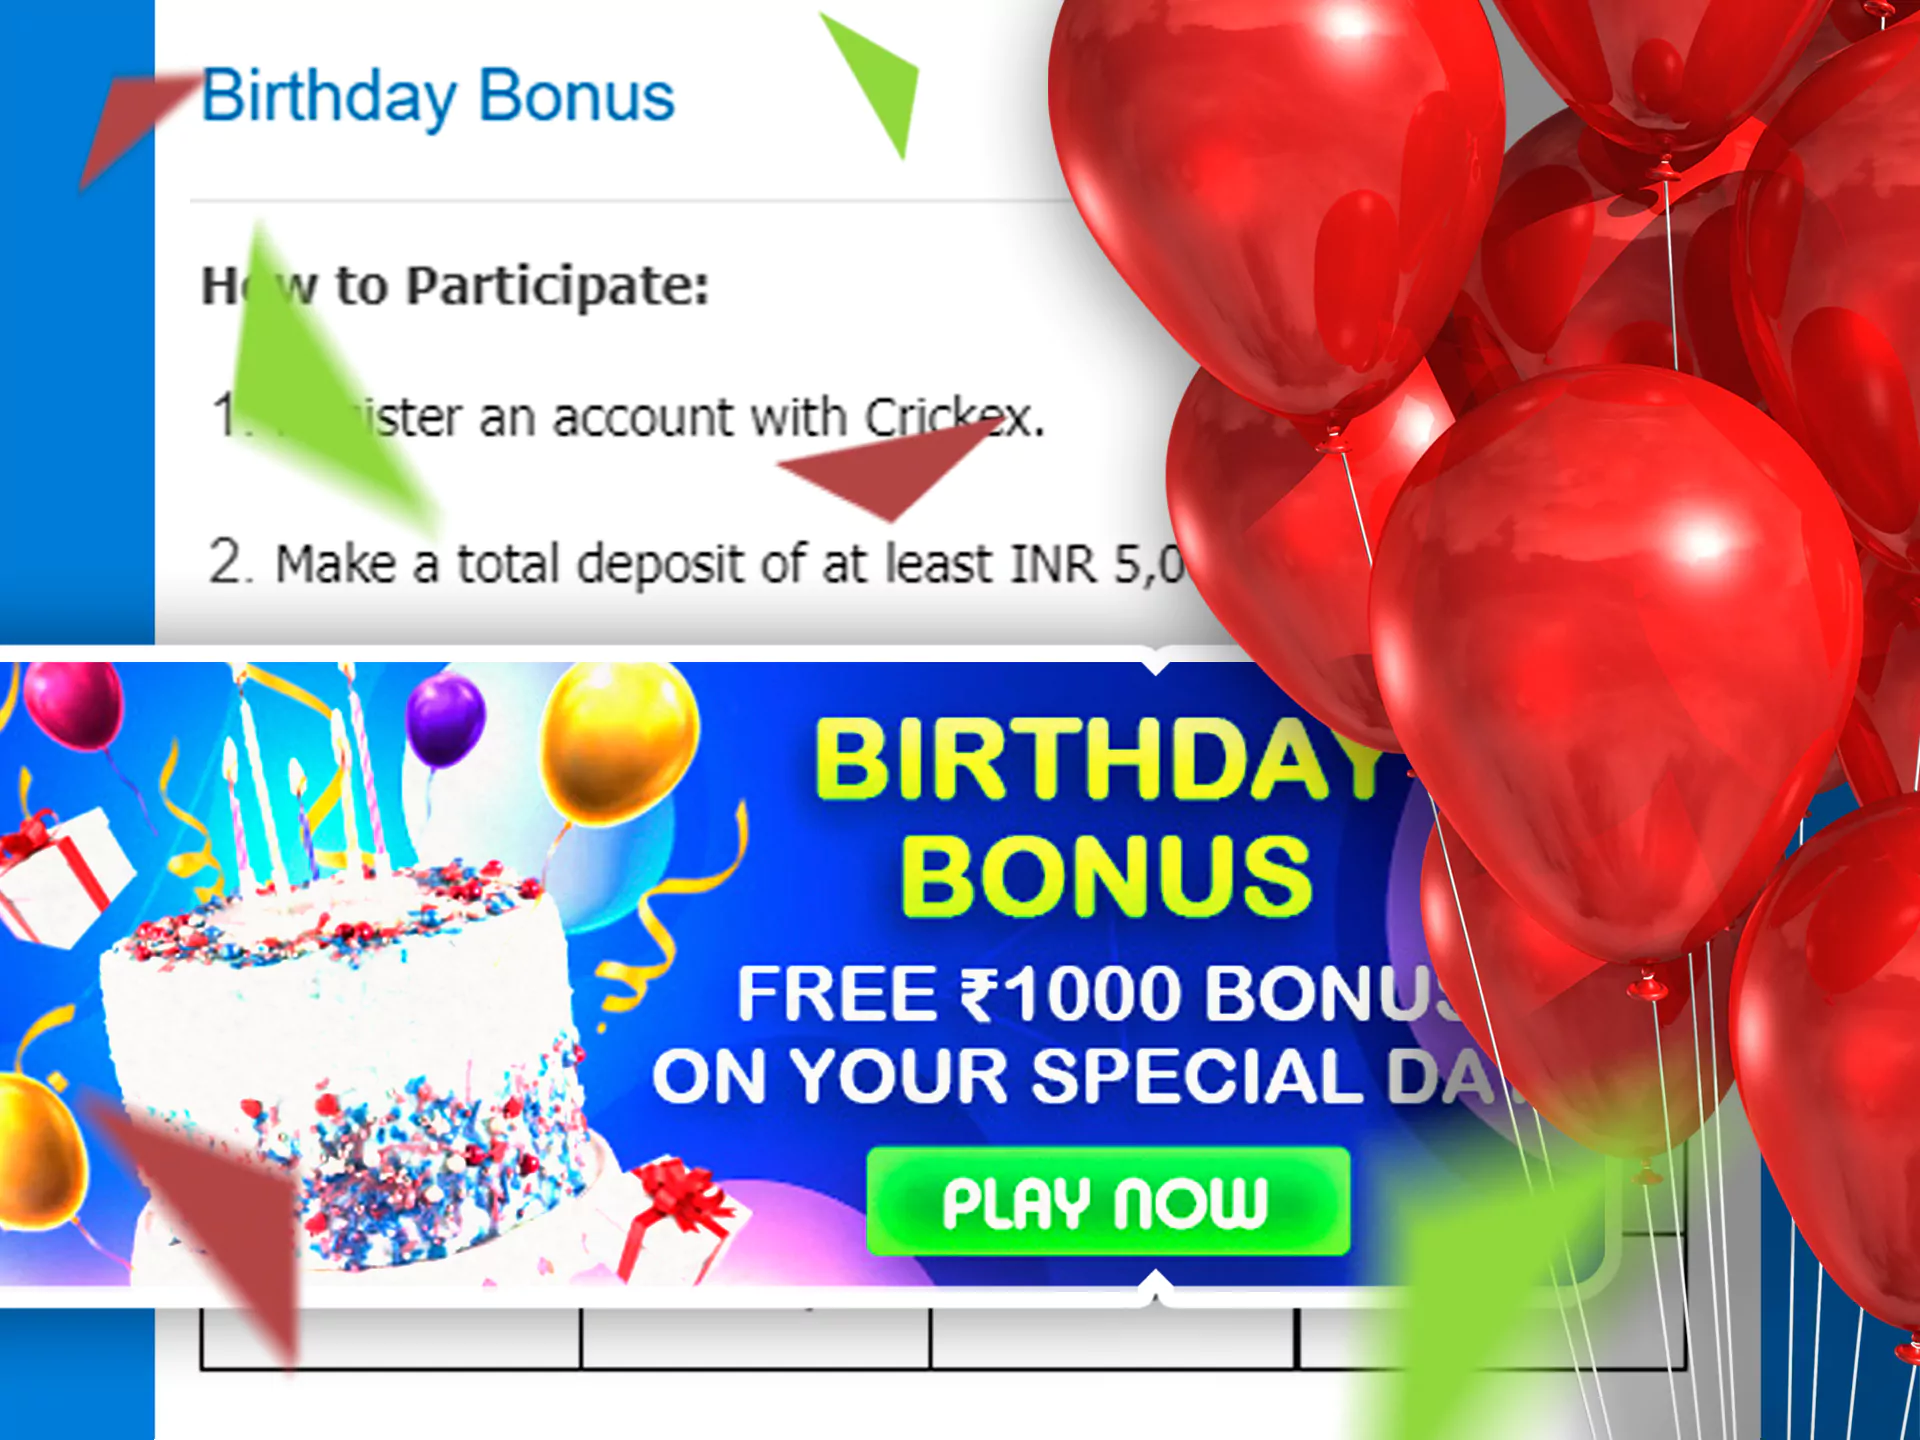 On your birthday, you can get an additional bonus from Crickex.